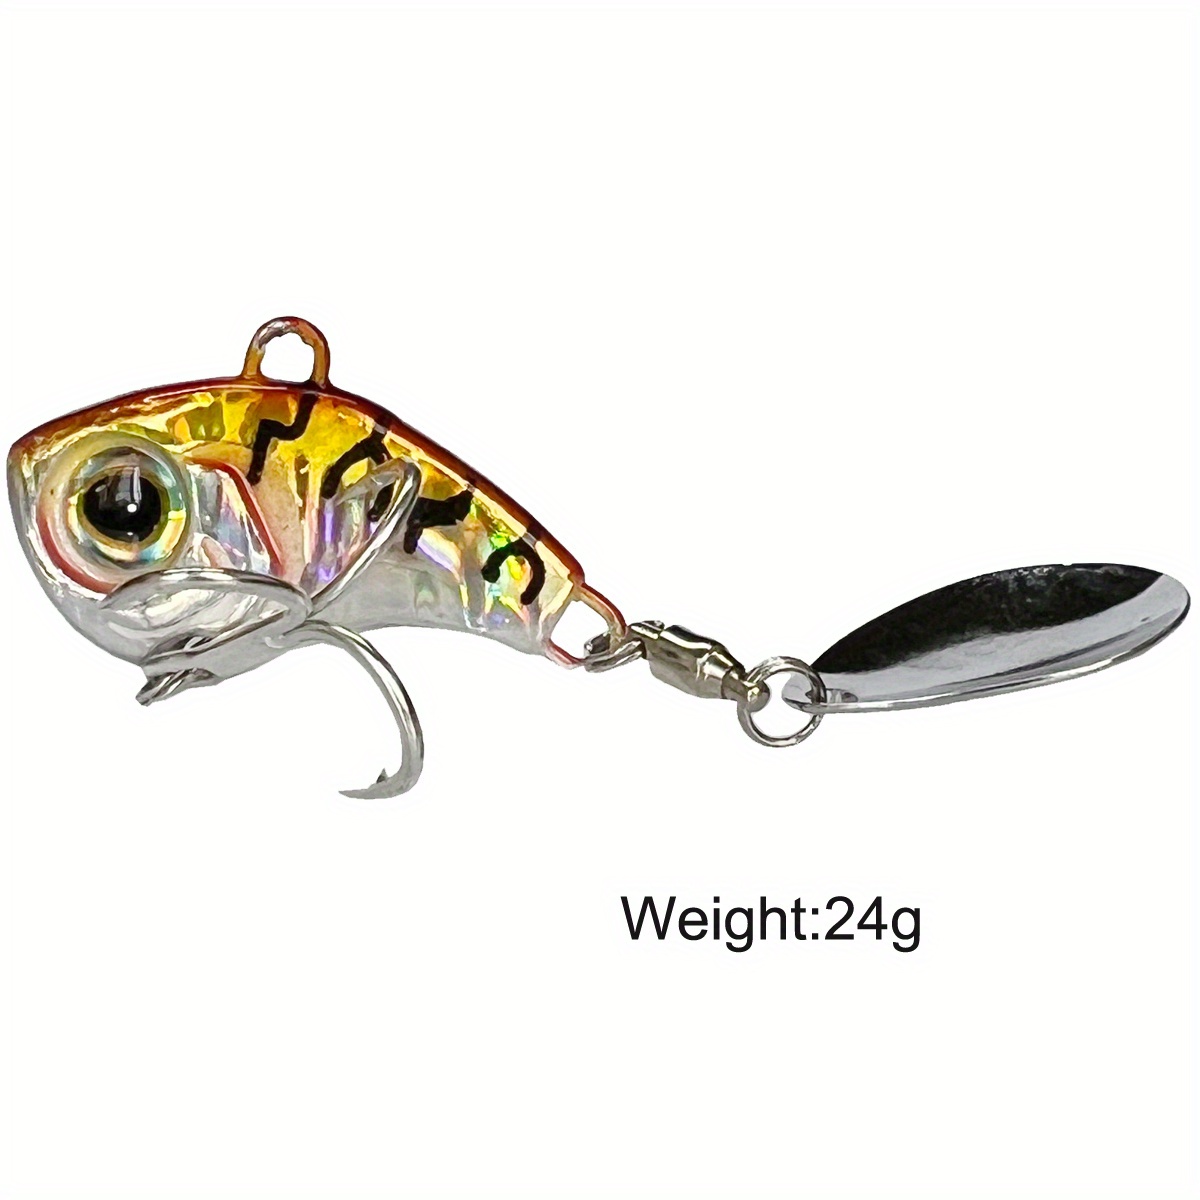 2pcs Metal Spoon Fishing Lures, 7cm 24g Metal Spoon Spinner Bait with  Double Rotating Blade Artificial Lure Baits Fishing Gear Gold+Silver